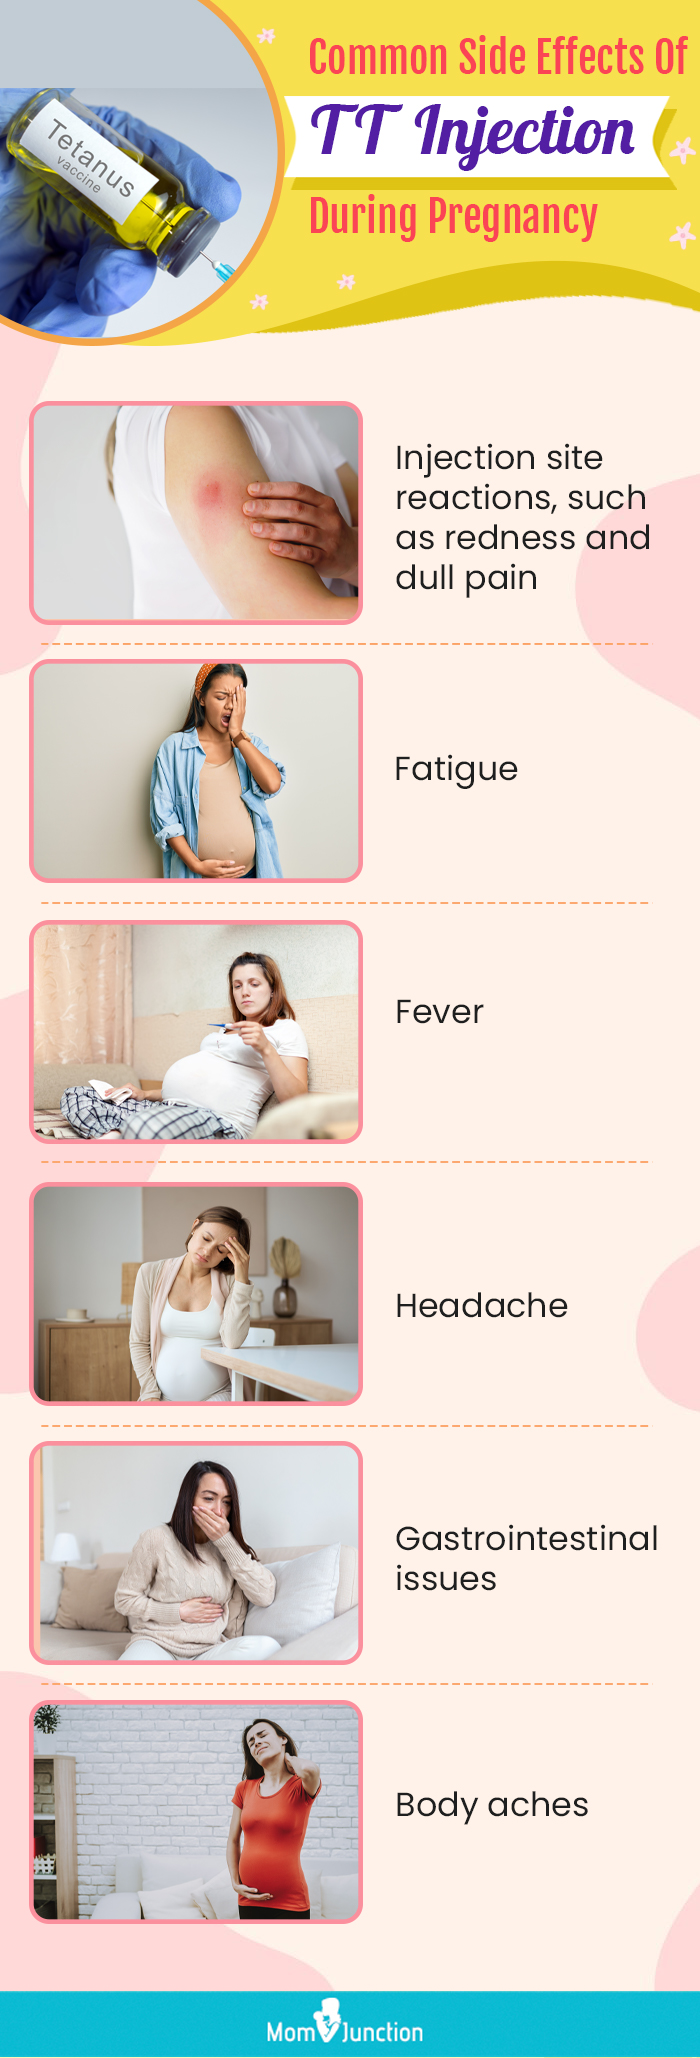 common side effects of tt injection during pregnancy (infographic)